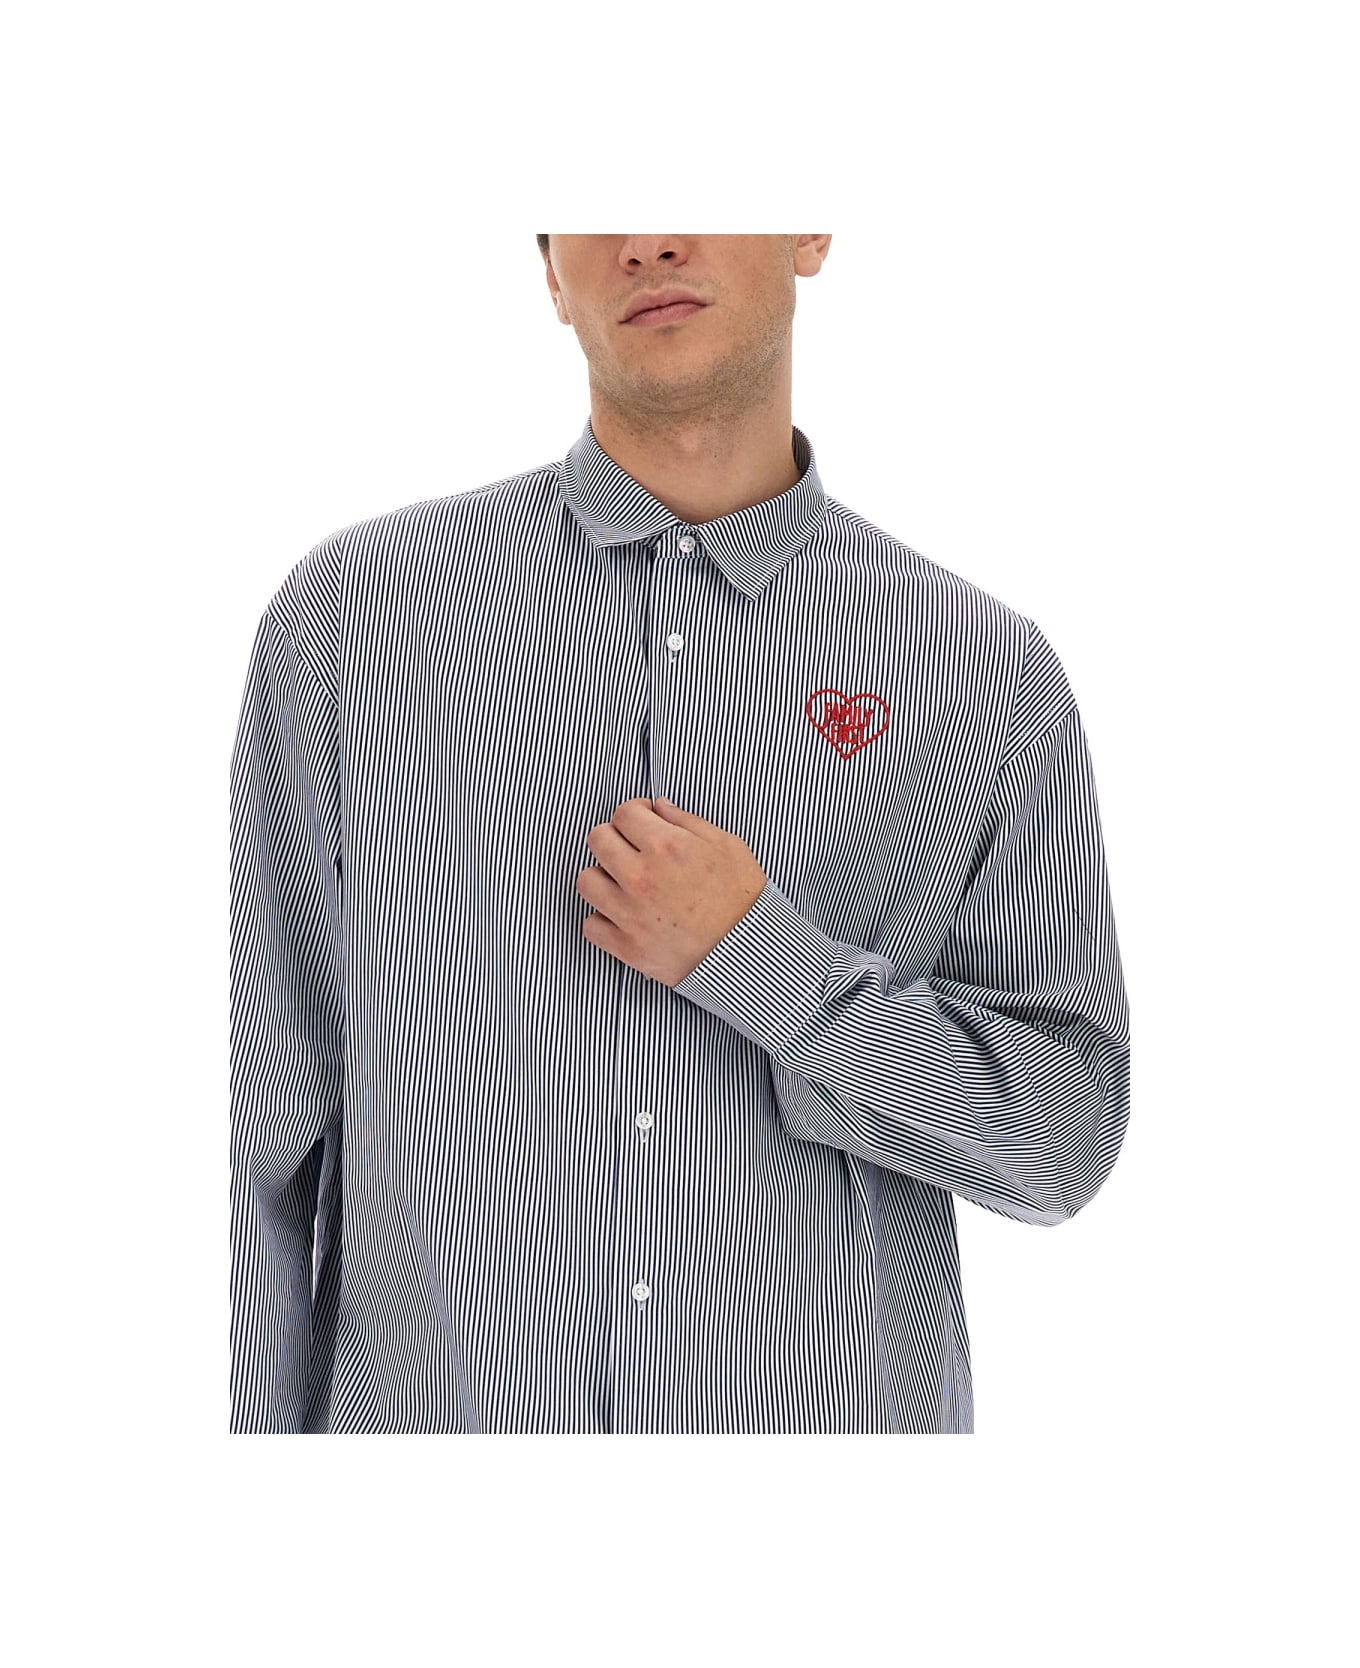 Family First Milano Shirt With Logo - BLUE シャツ